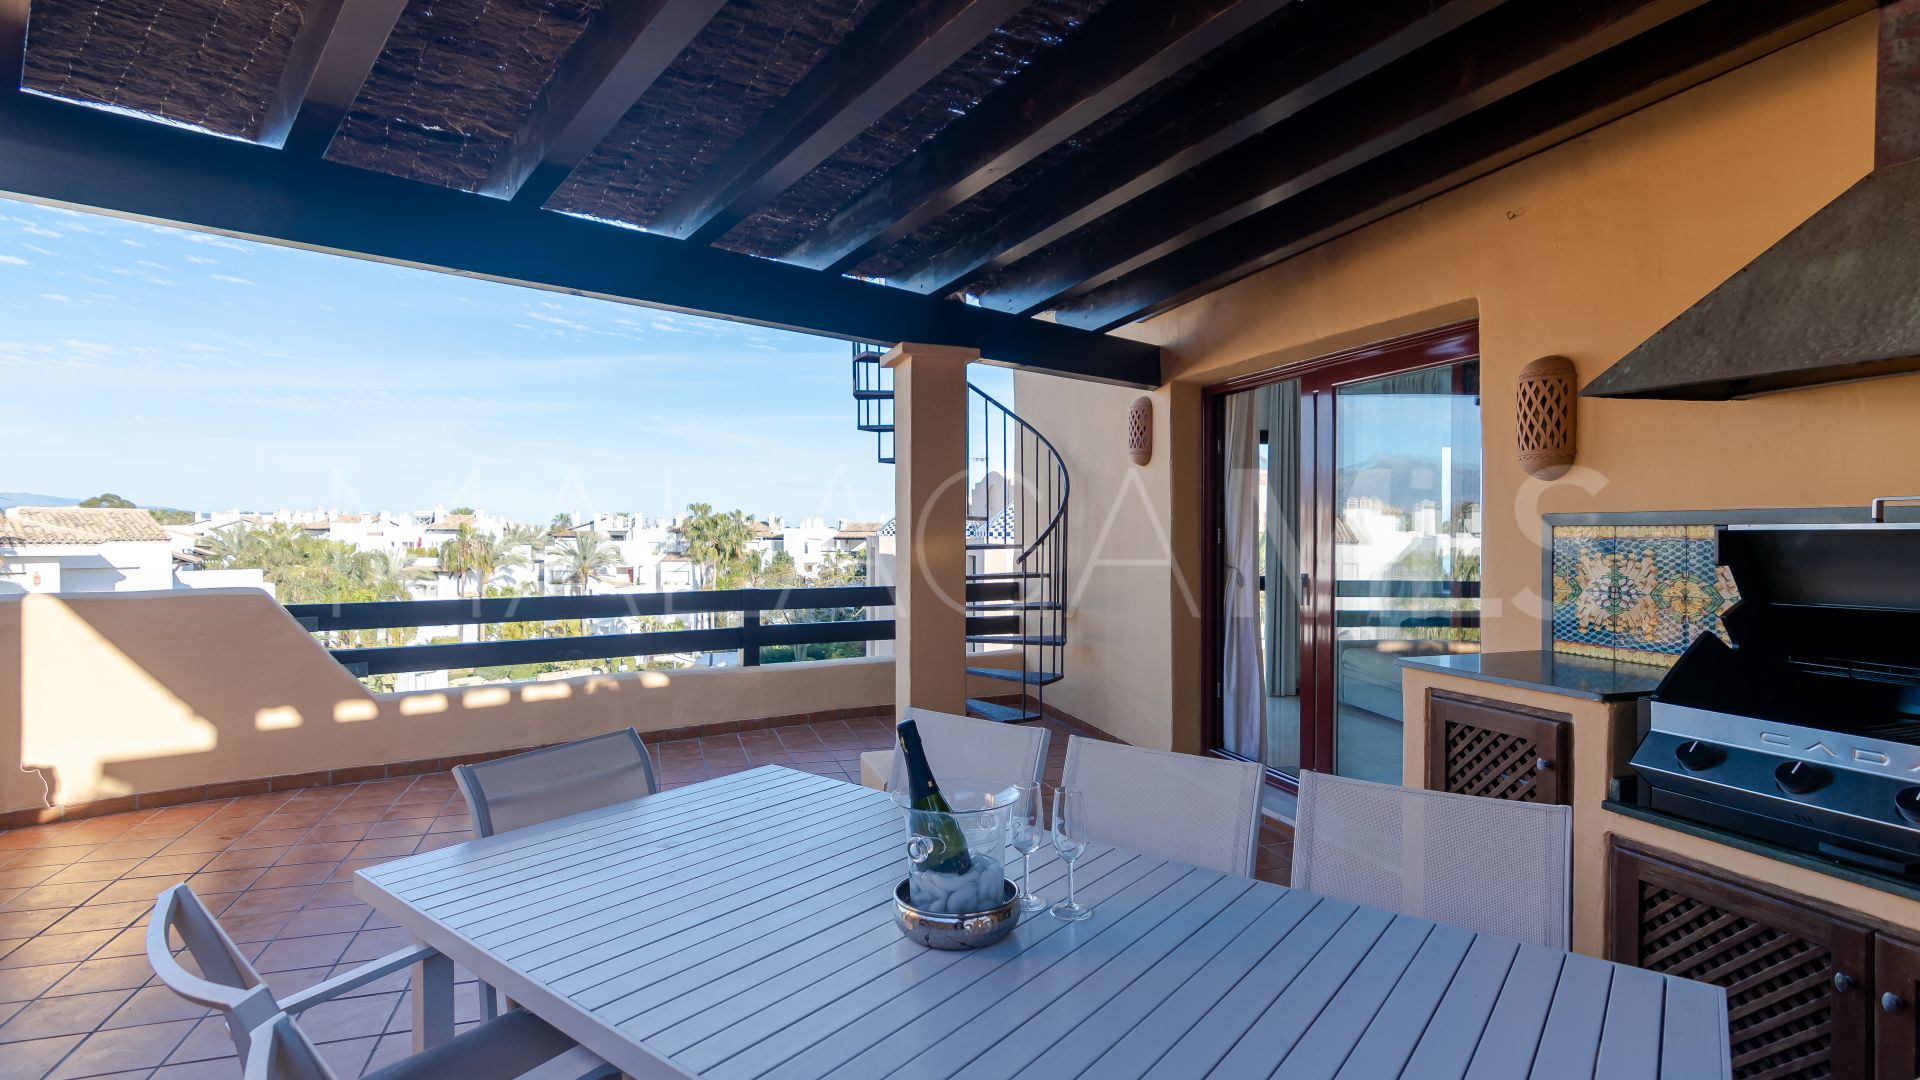 For sale Costalita 3 bedrooms penthouse